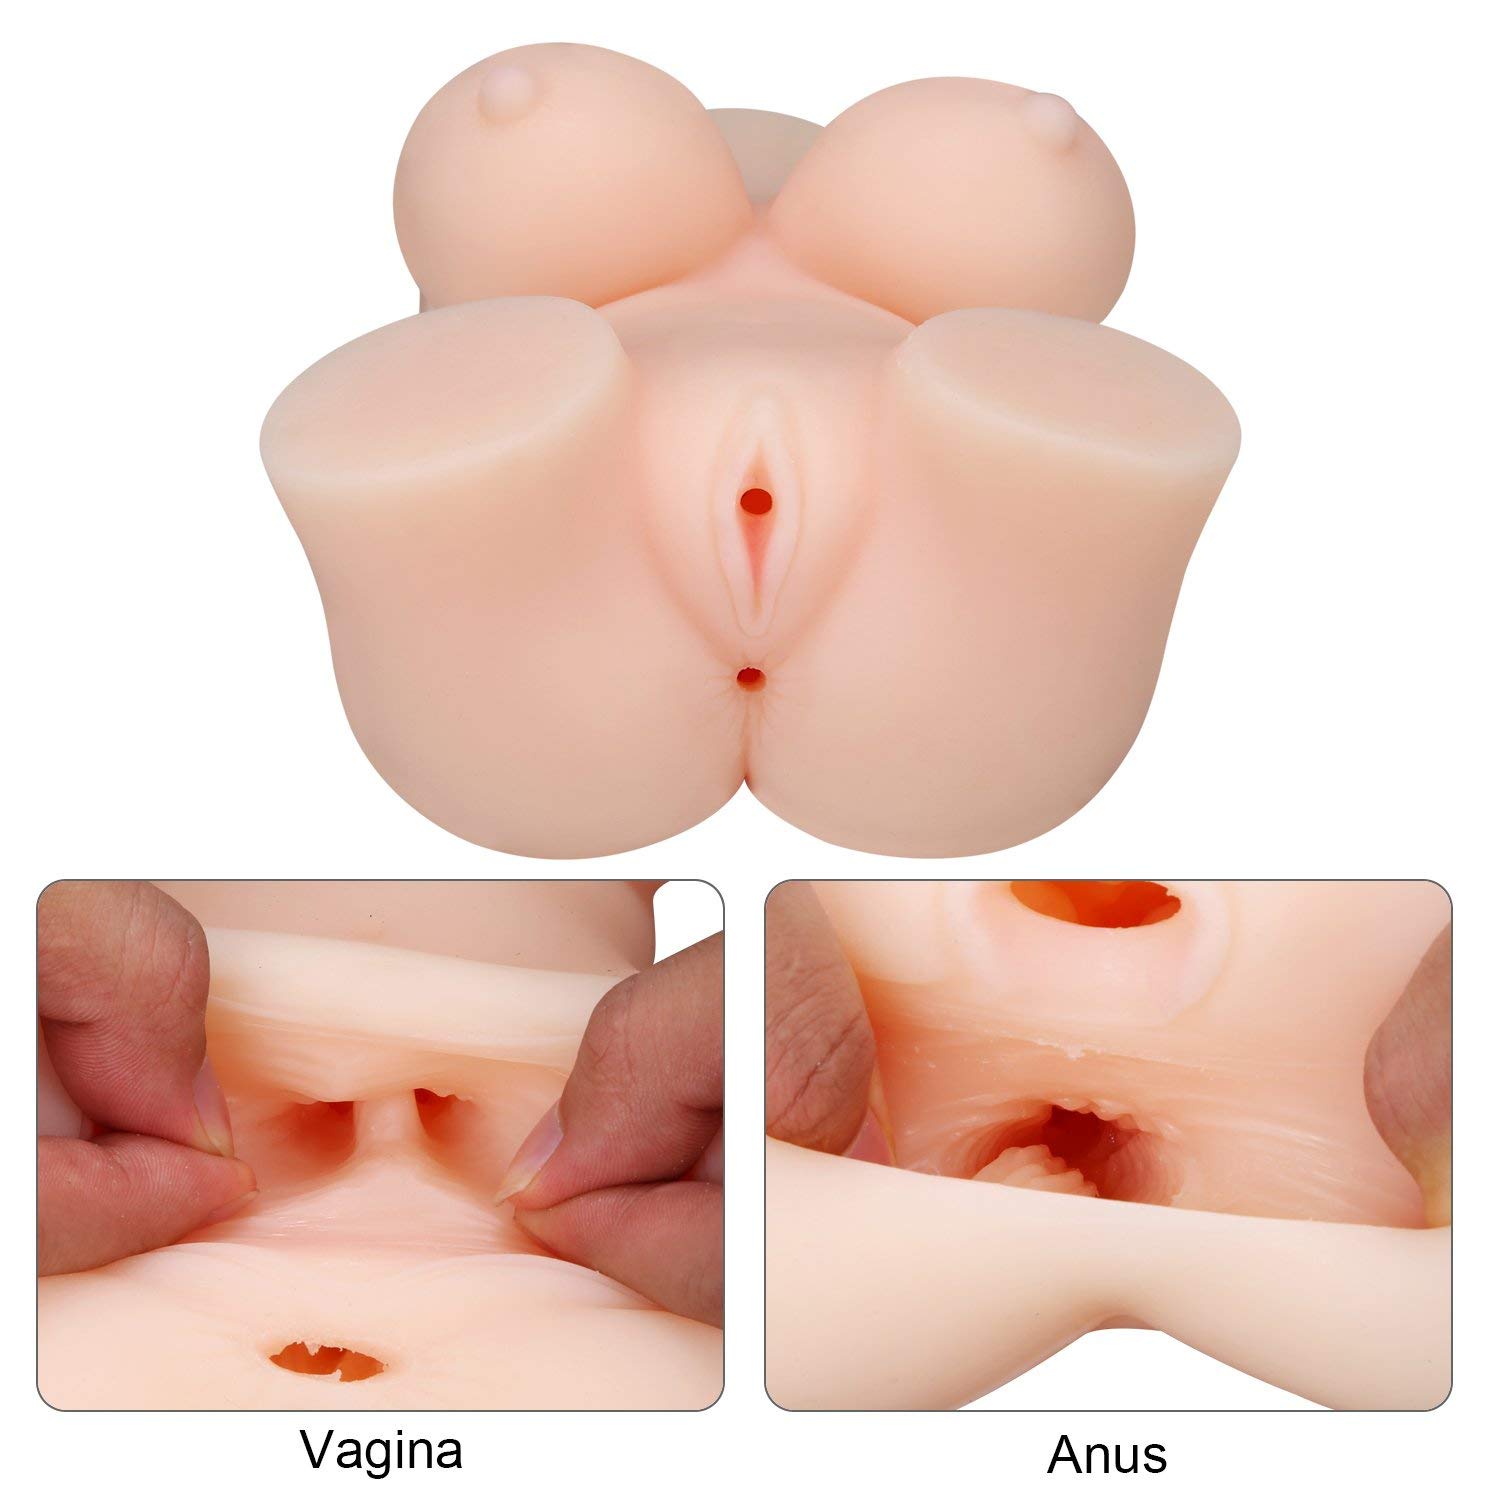 What are the advantages of pocket vaginas? 